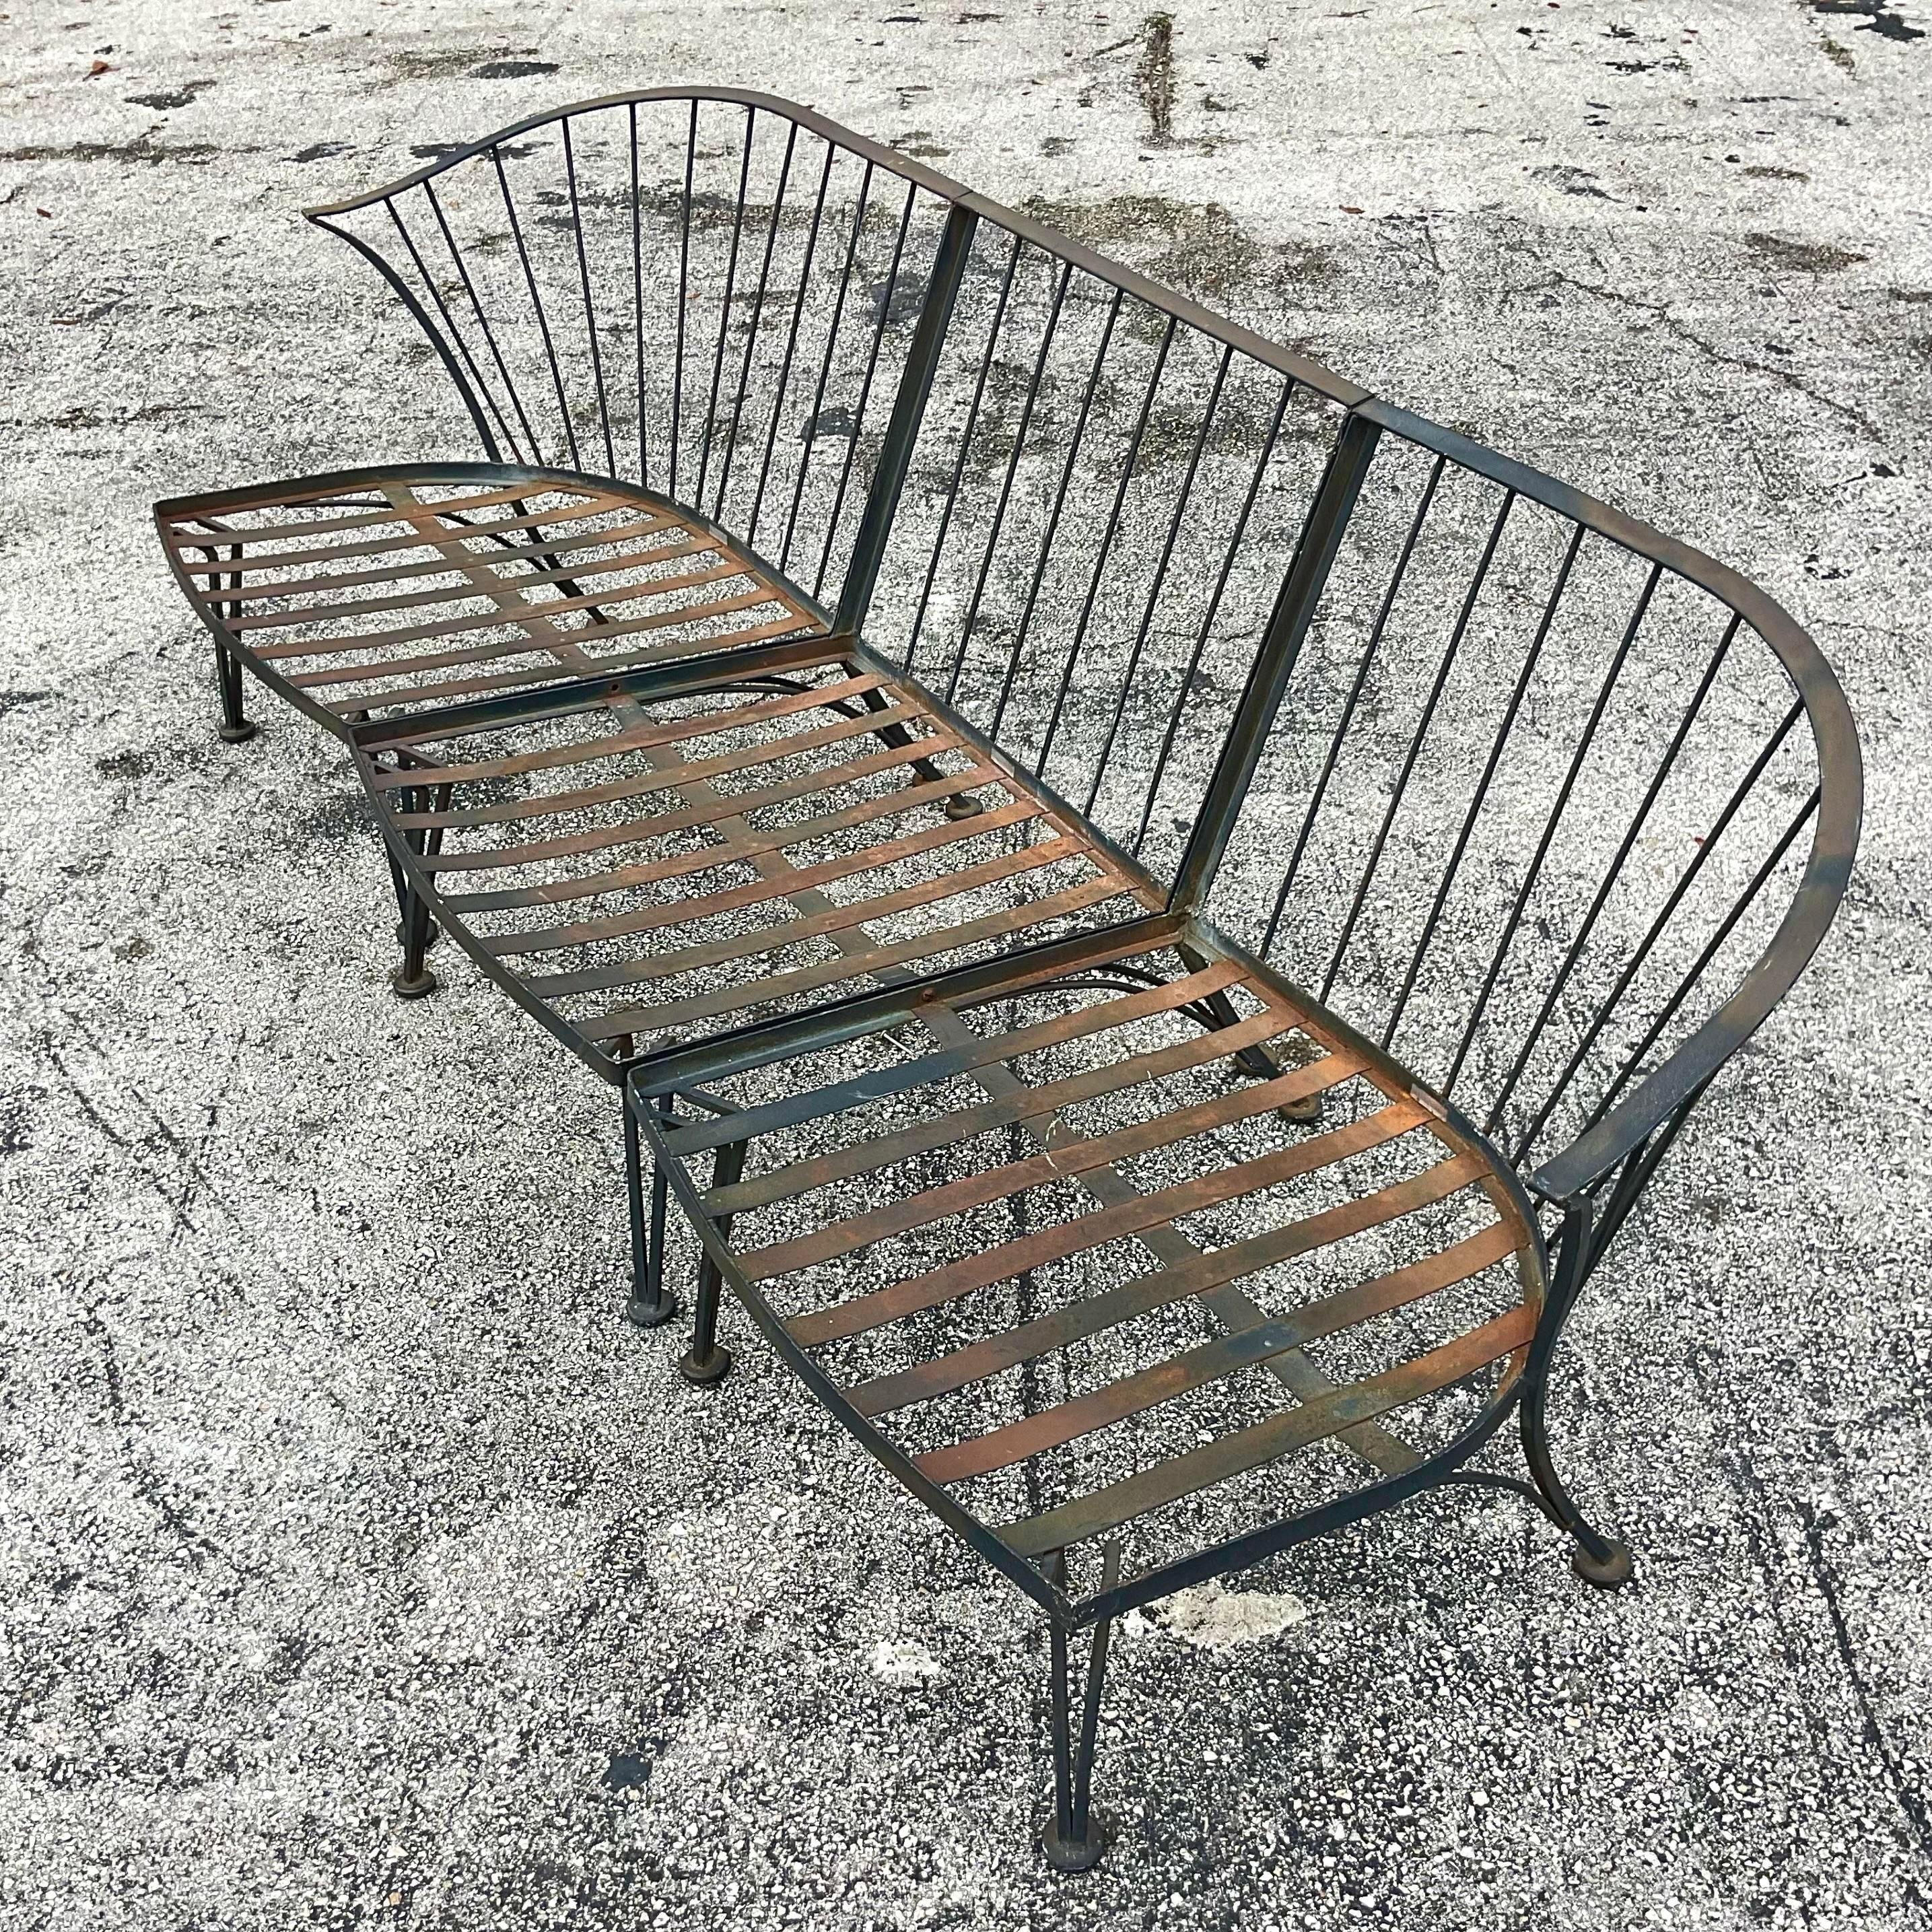 A fabulous vintage Coastal outdoor sofa. Made by the iconic Russell Woodard and tagged on the seat. Chic black wrought iron in a great curved shape. Acquired from a Palm Beach estate.